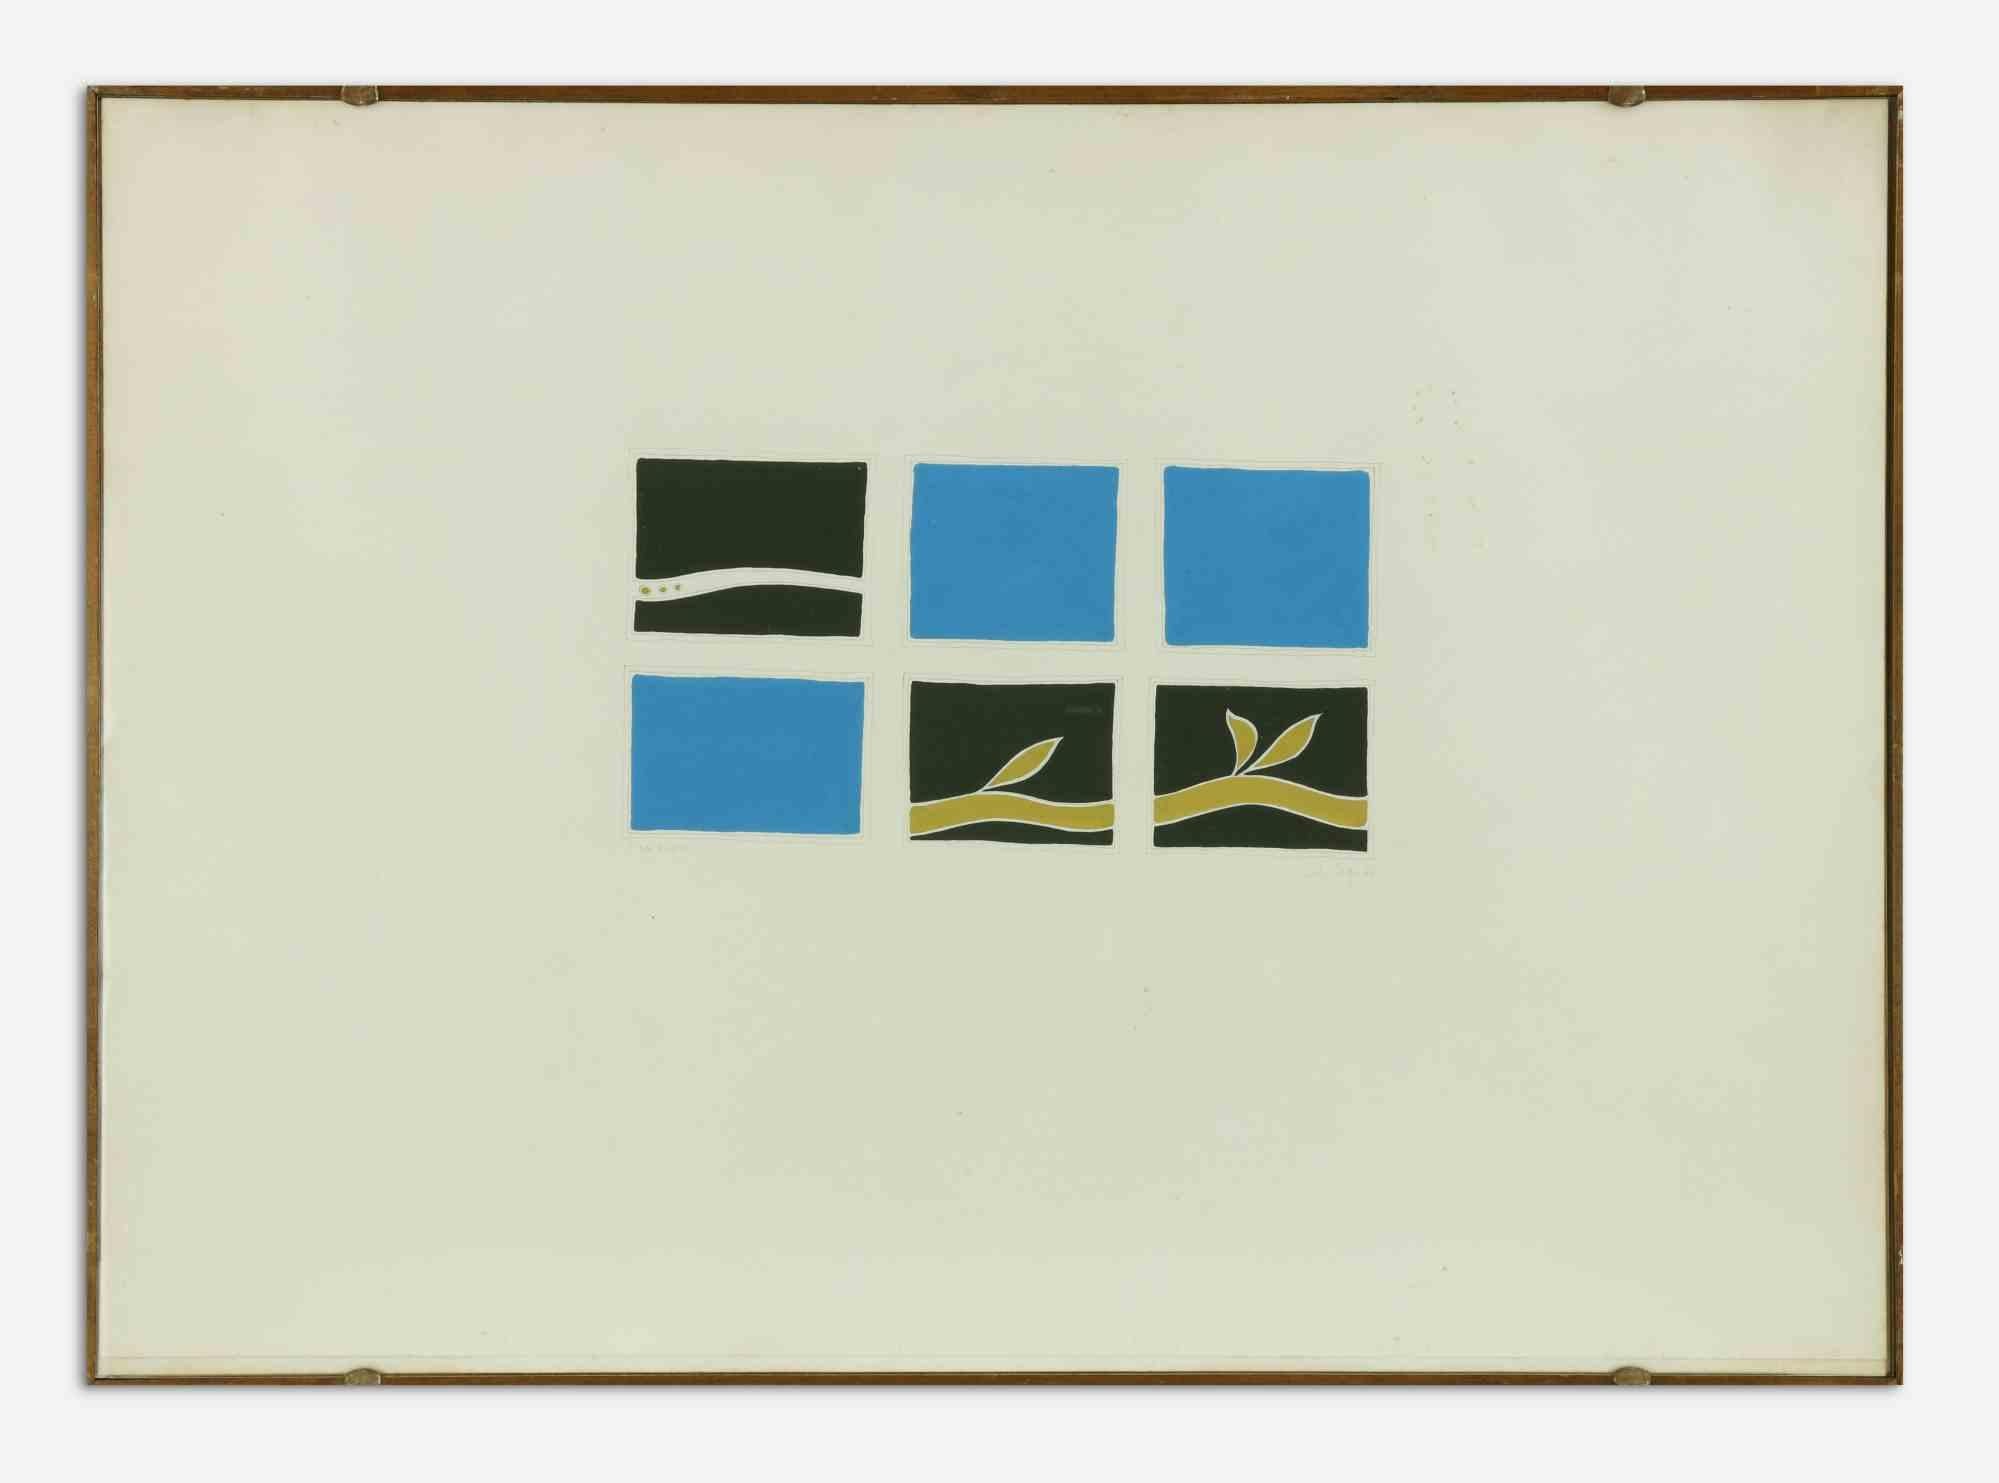 A poet is a contemporary artwork realized by Carlo Cego in 1966.

Miched colored pencil and watercolor drawing on paper.

Includes frame: 52 x 2.5 x 72 cm

Hand signed and titled on the lower margin.